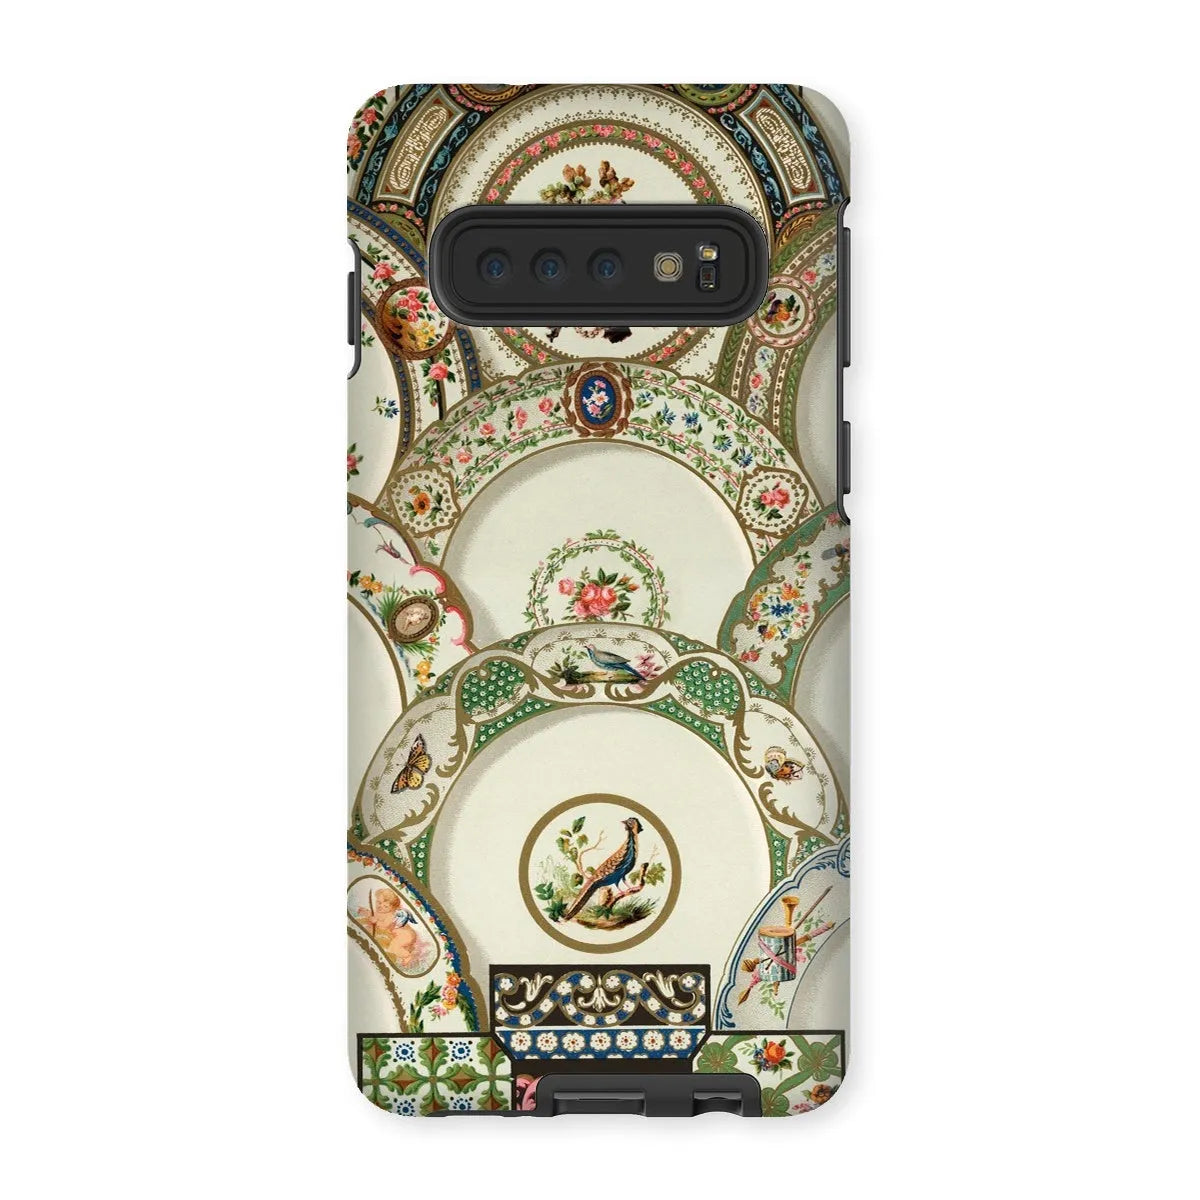 Decorative Plates By Auguste Racinet Tough Phone Case - Samsung Galaxy S10 / Matte - Mobile Phone Cases - Aesthetic Art